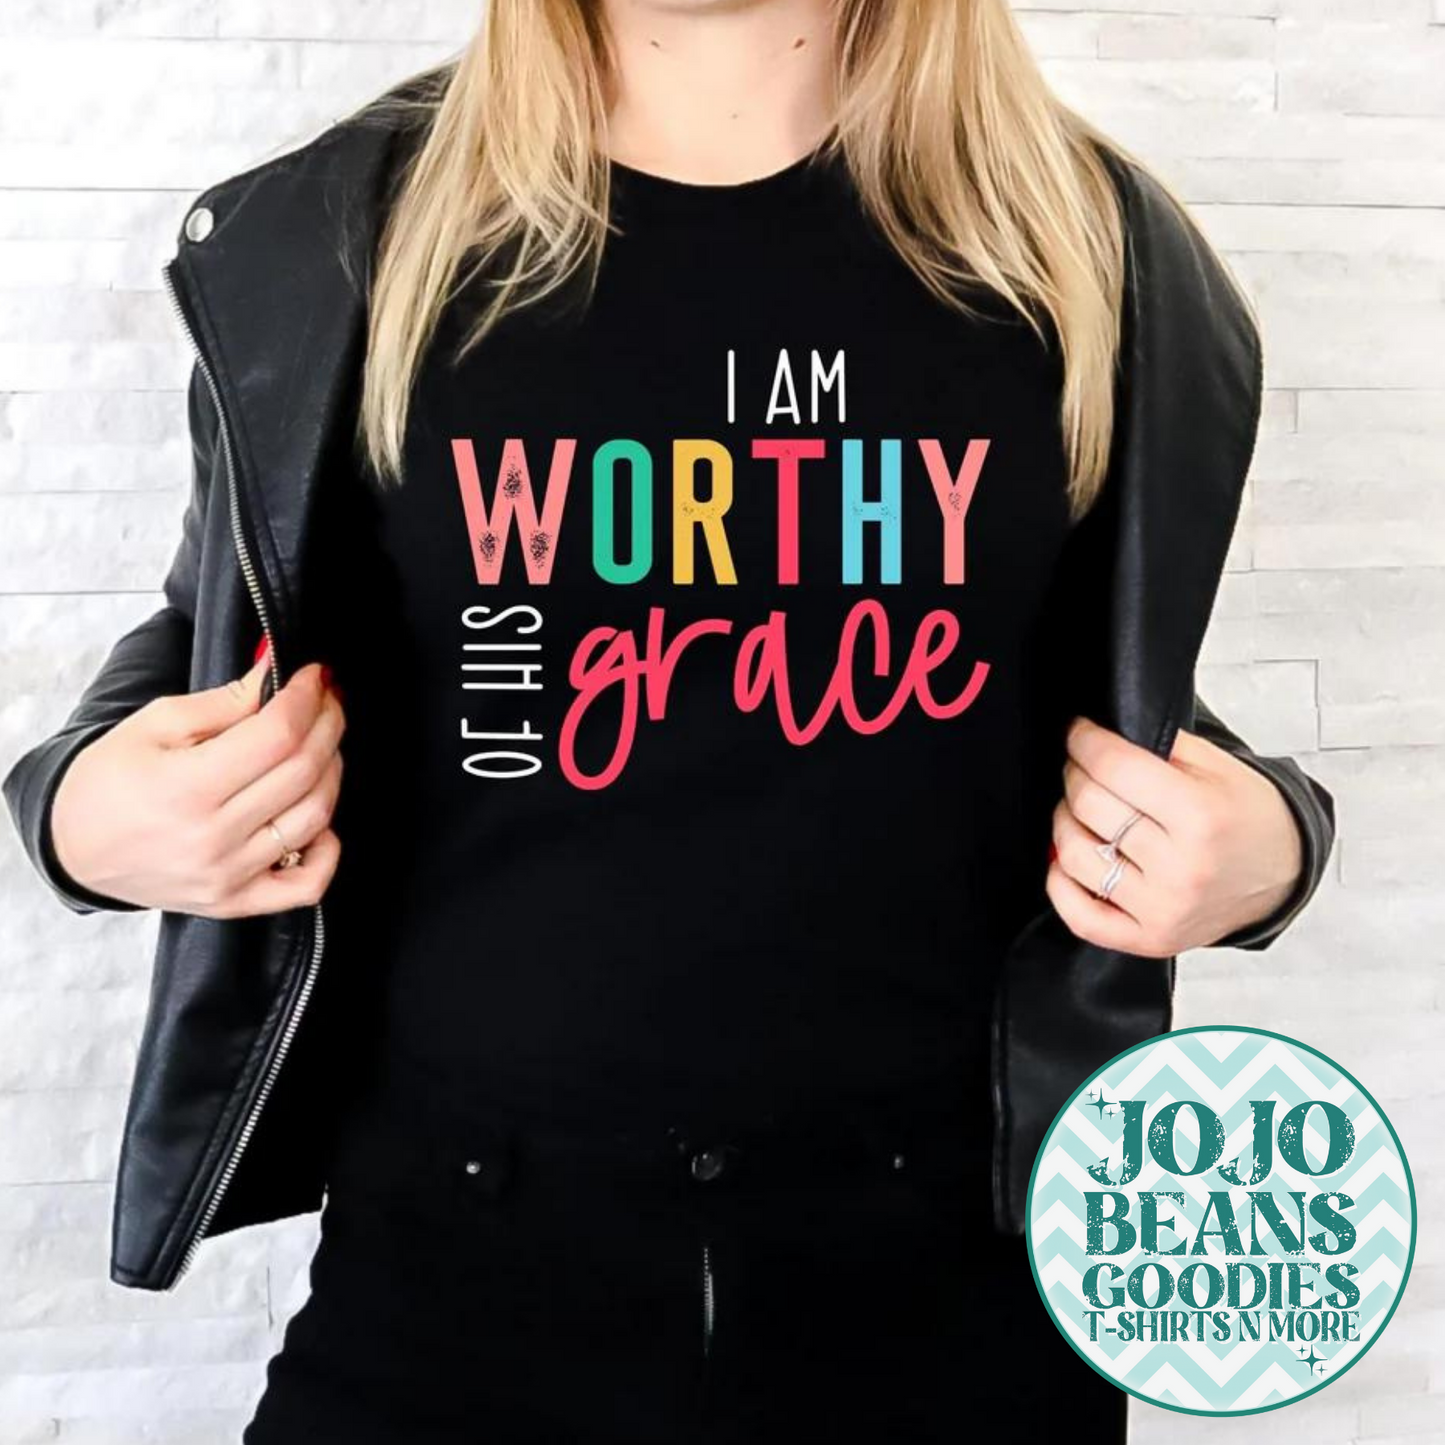 I Am Worthy Of His Grace